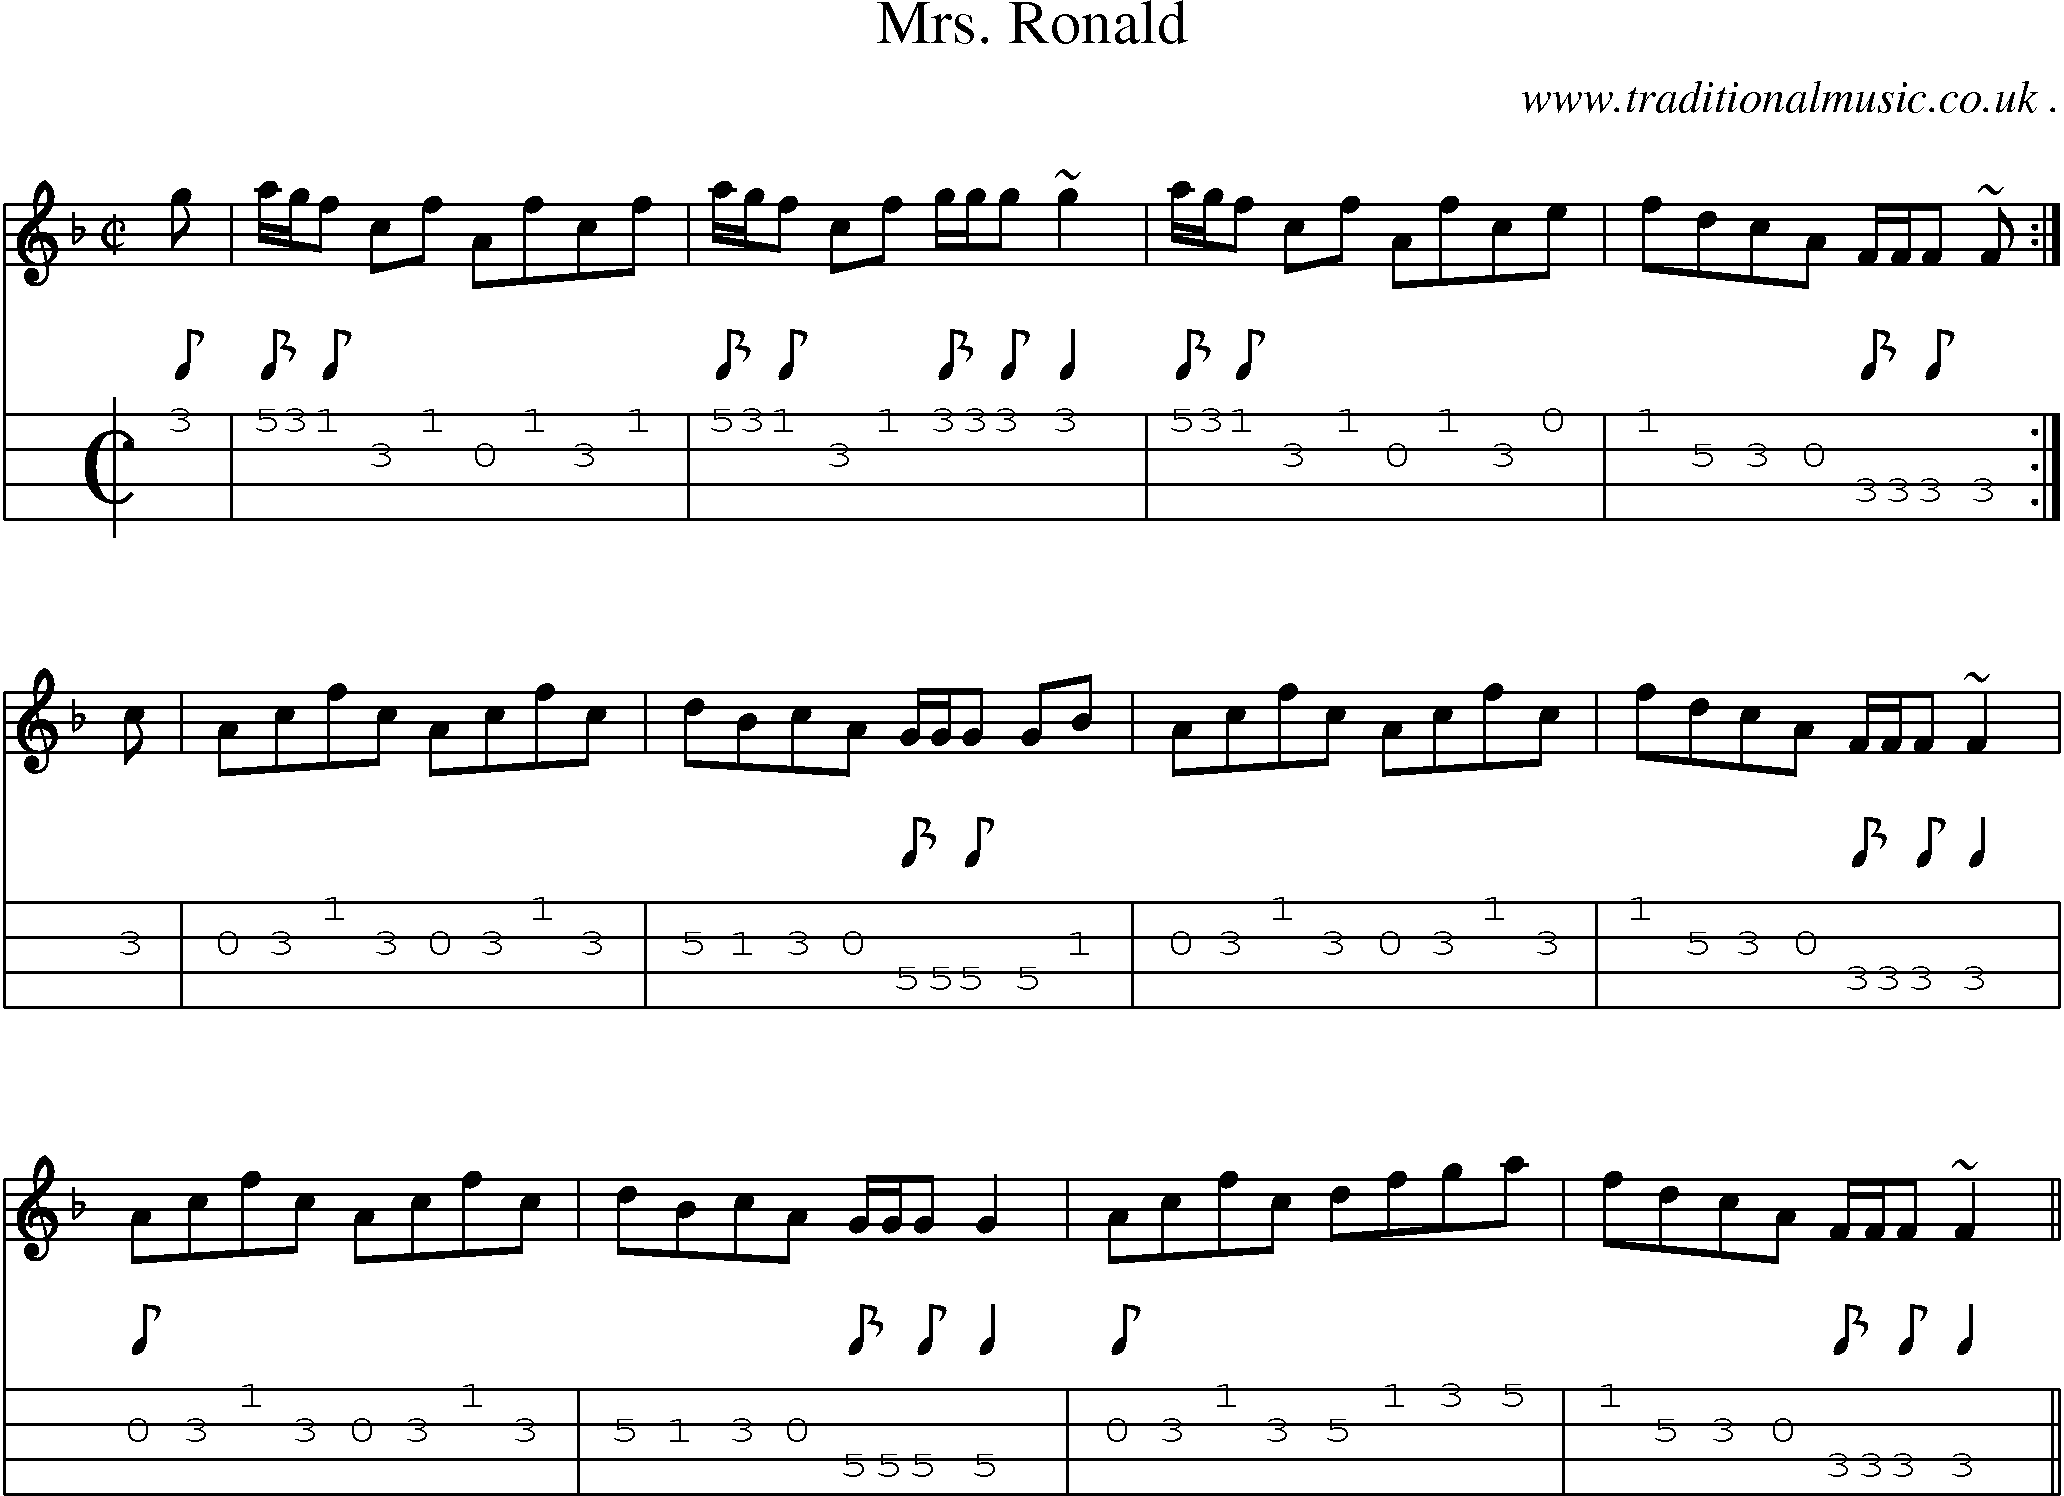 Sheet-music  score, Chords and Mandolin Tabs for Mrs Ronald